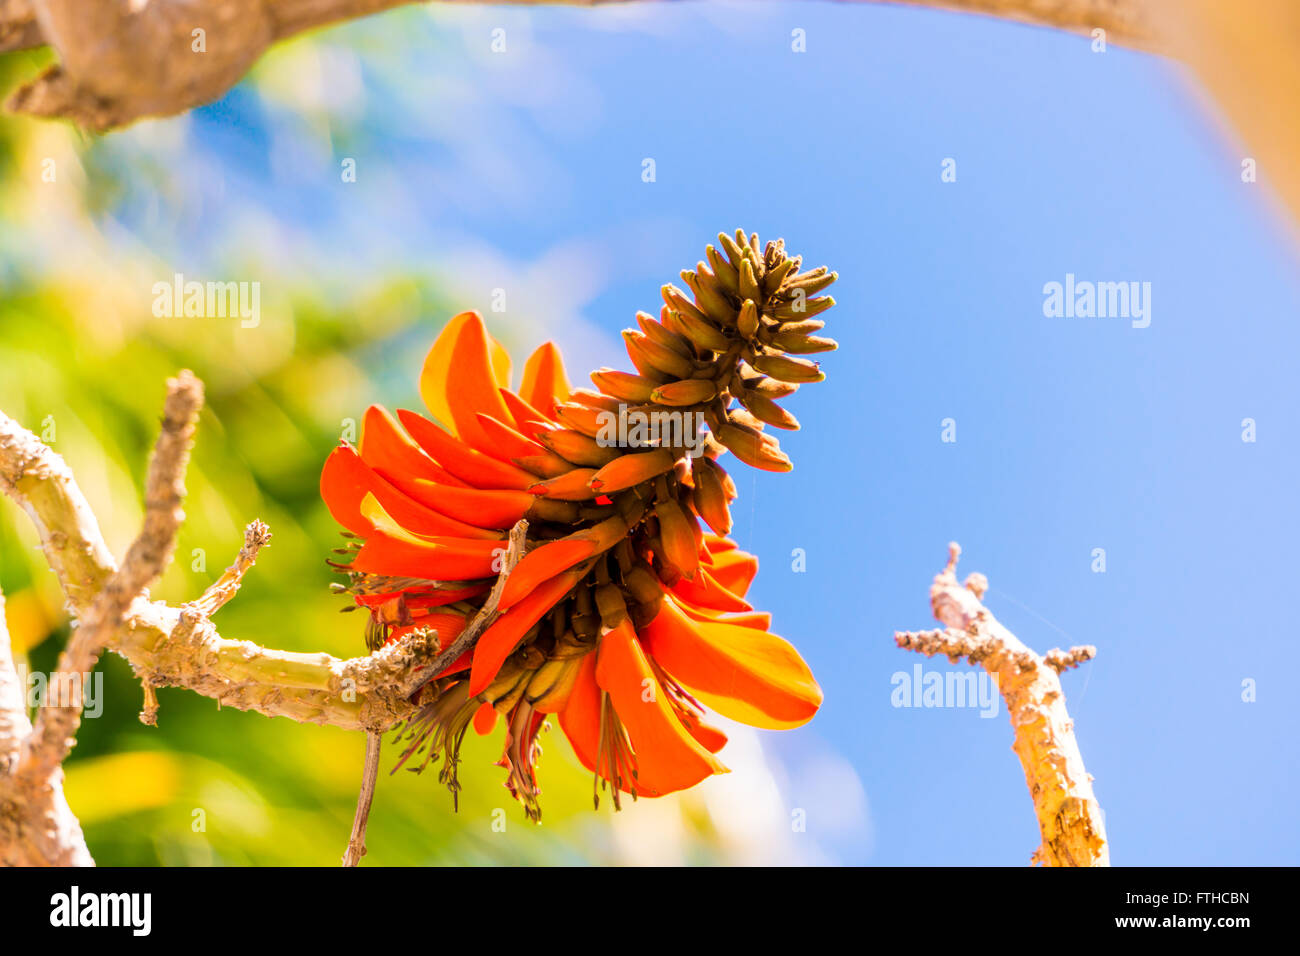 Tropical flowering plant Erythrina crist-galli: Common name Coral Tree - Flame Tree. Stock Photo